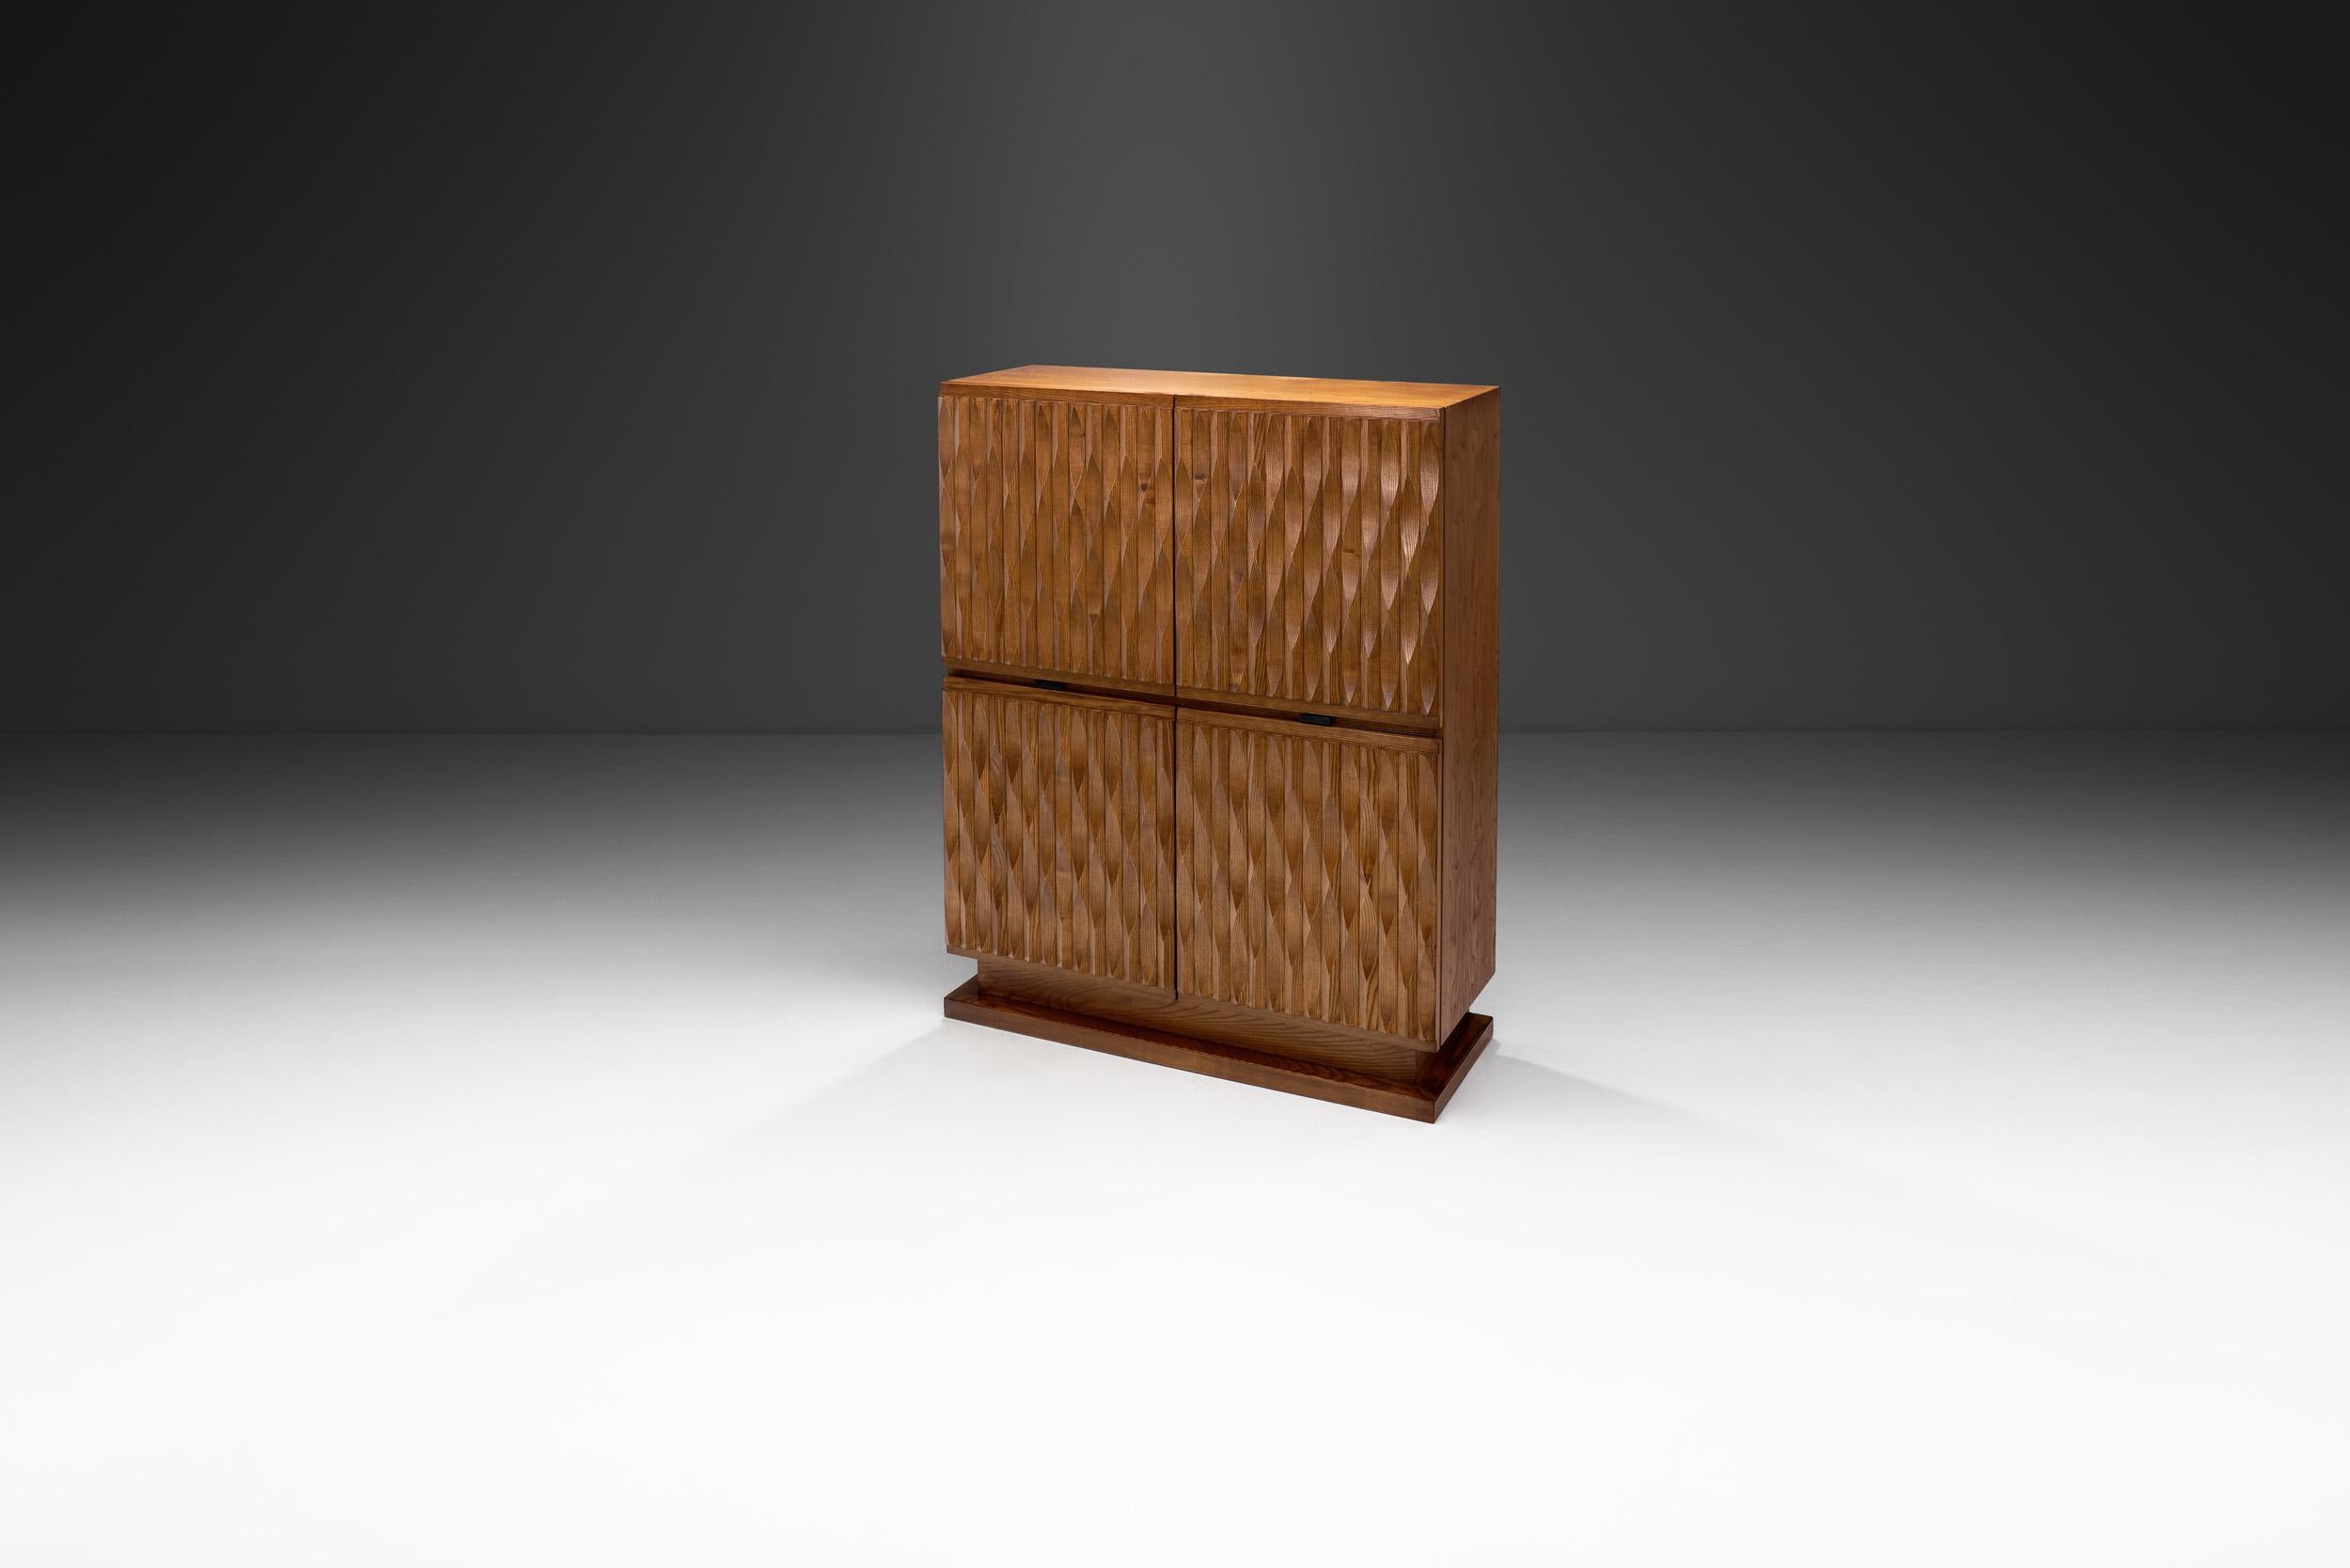 Featuring a distinctive carved motif, this cabinet melds seamlessly with any style thanks to its elegant sense of whimsy. The oak form is elemental, enhanced by the carvings and the wood itself.

In furniture design Brutalism inspired designers to